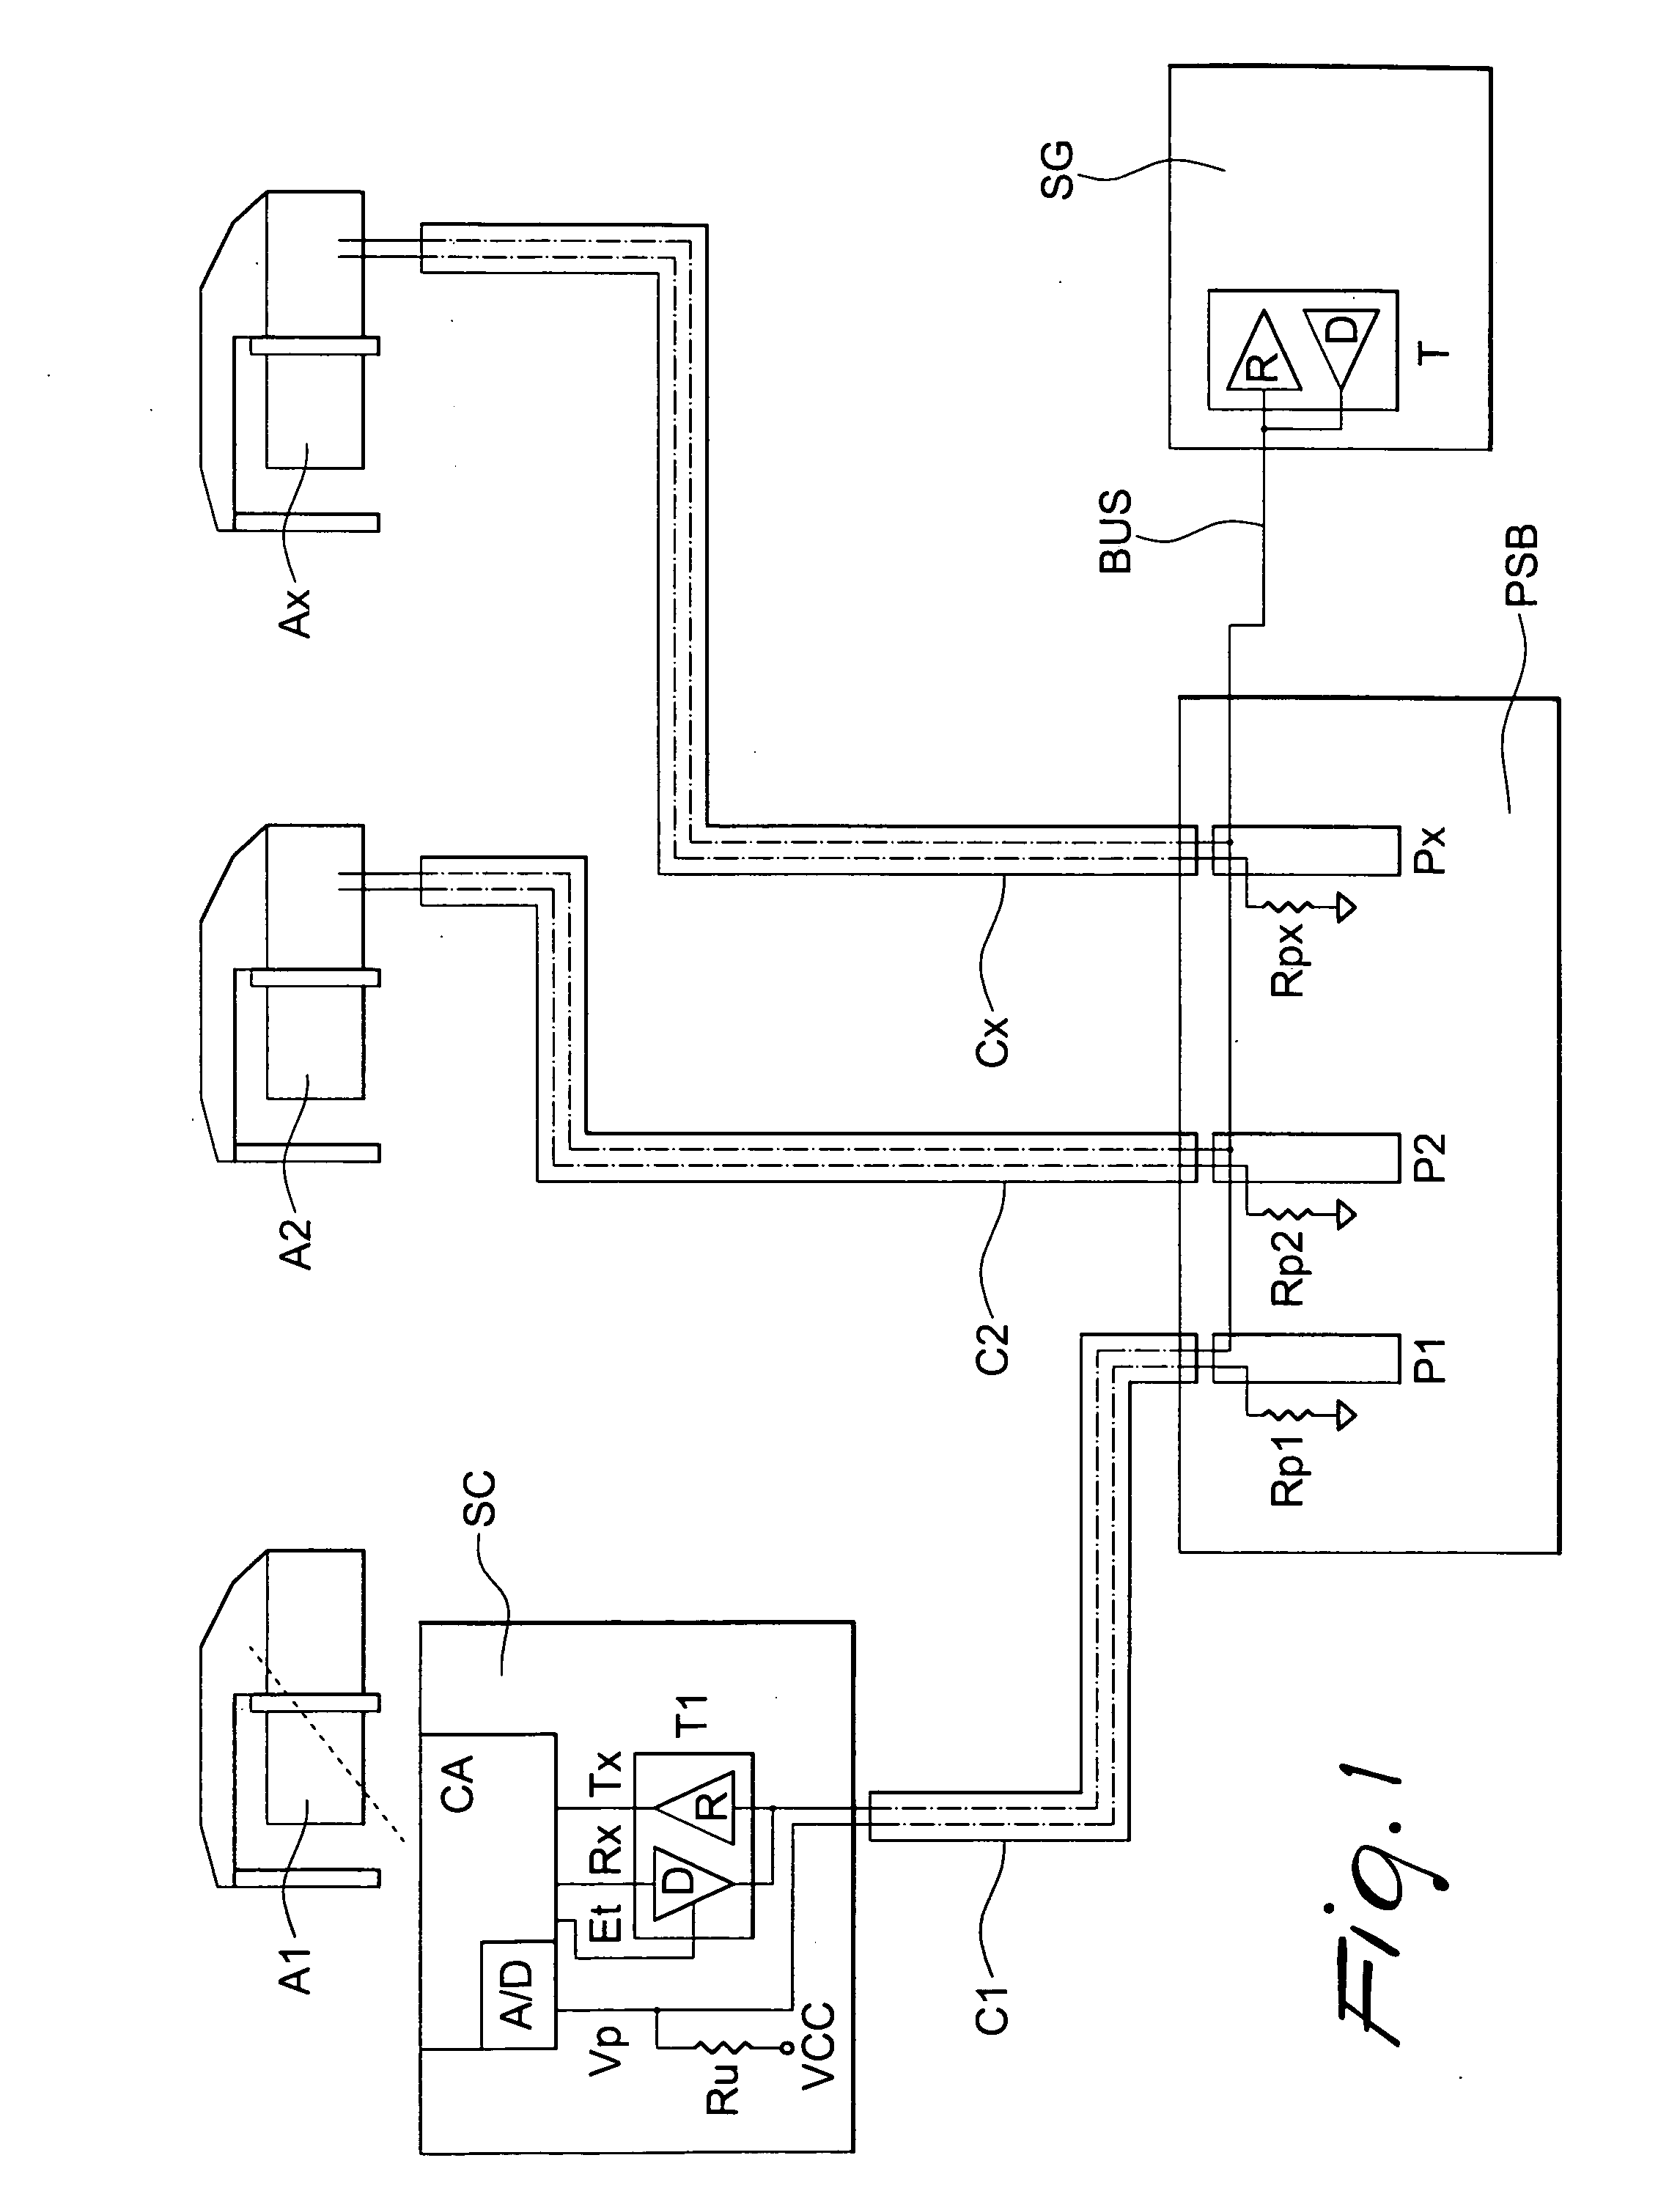 Three-way connector for connecting weft feeders of textile machines to a serial bus, and a control system based thereon